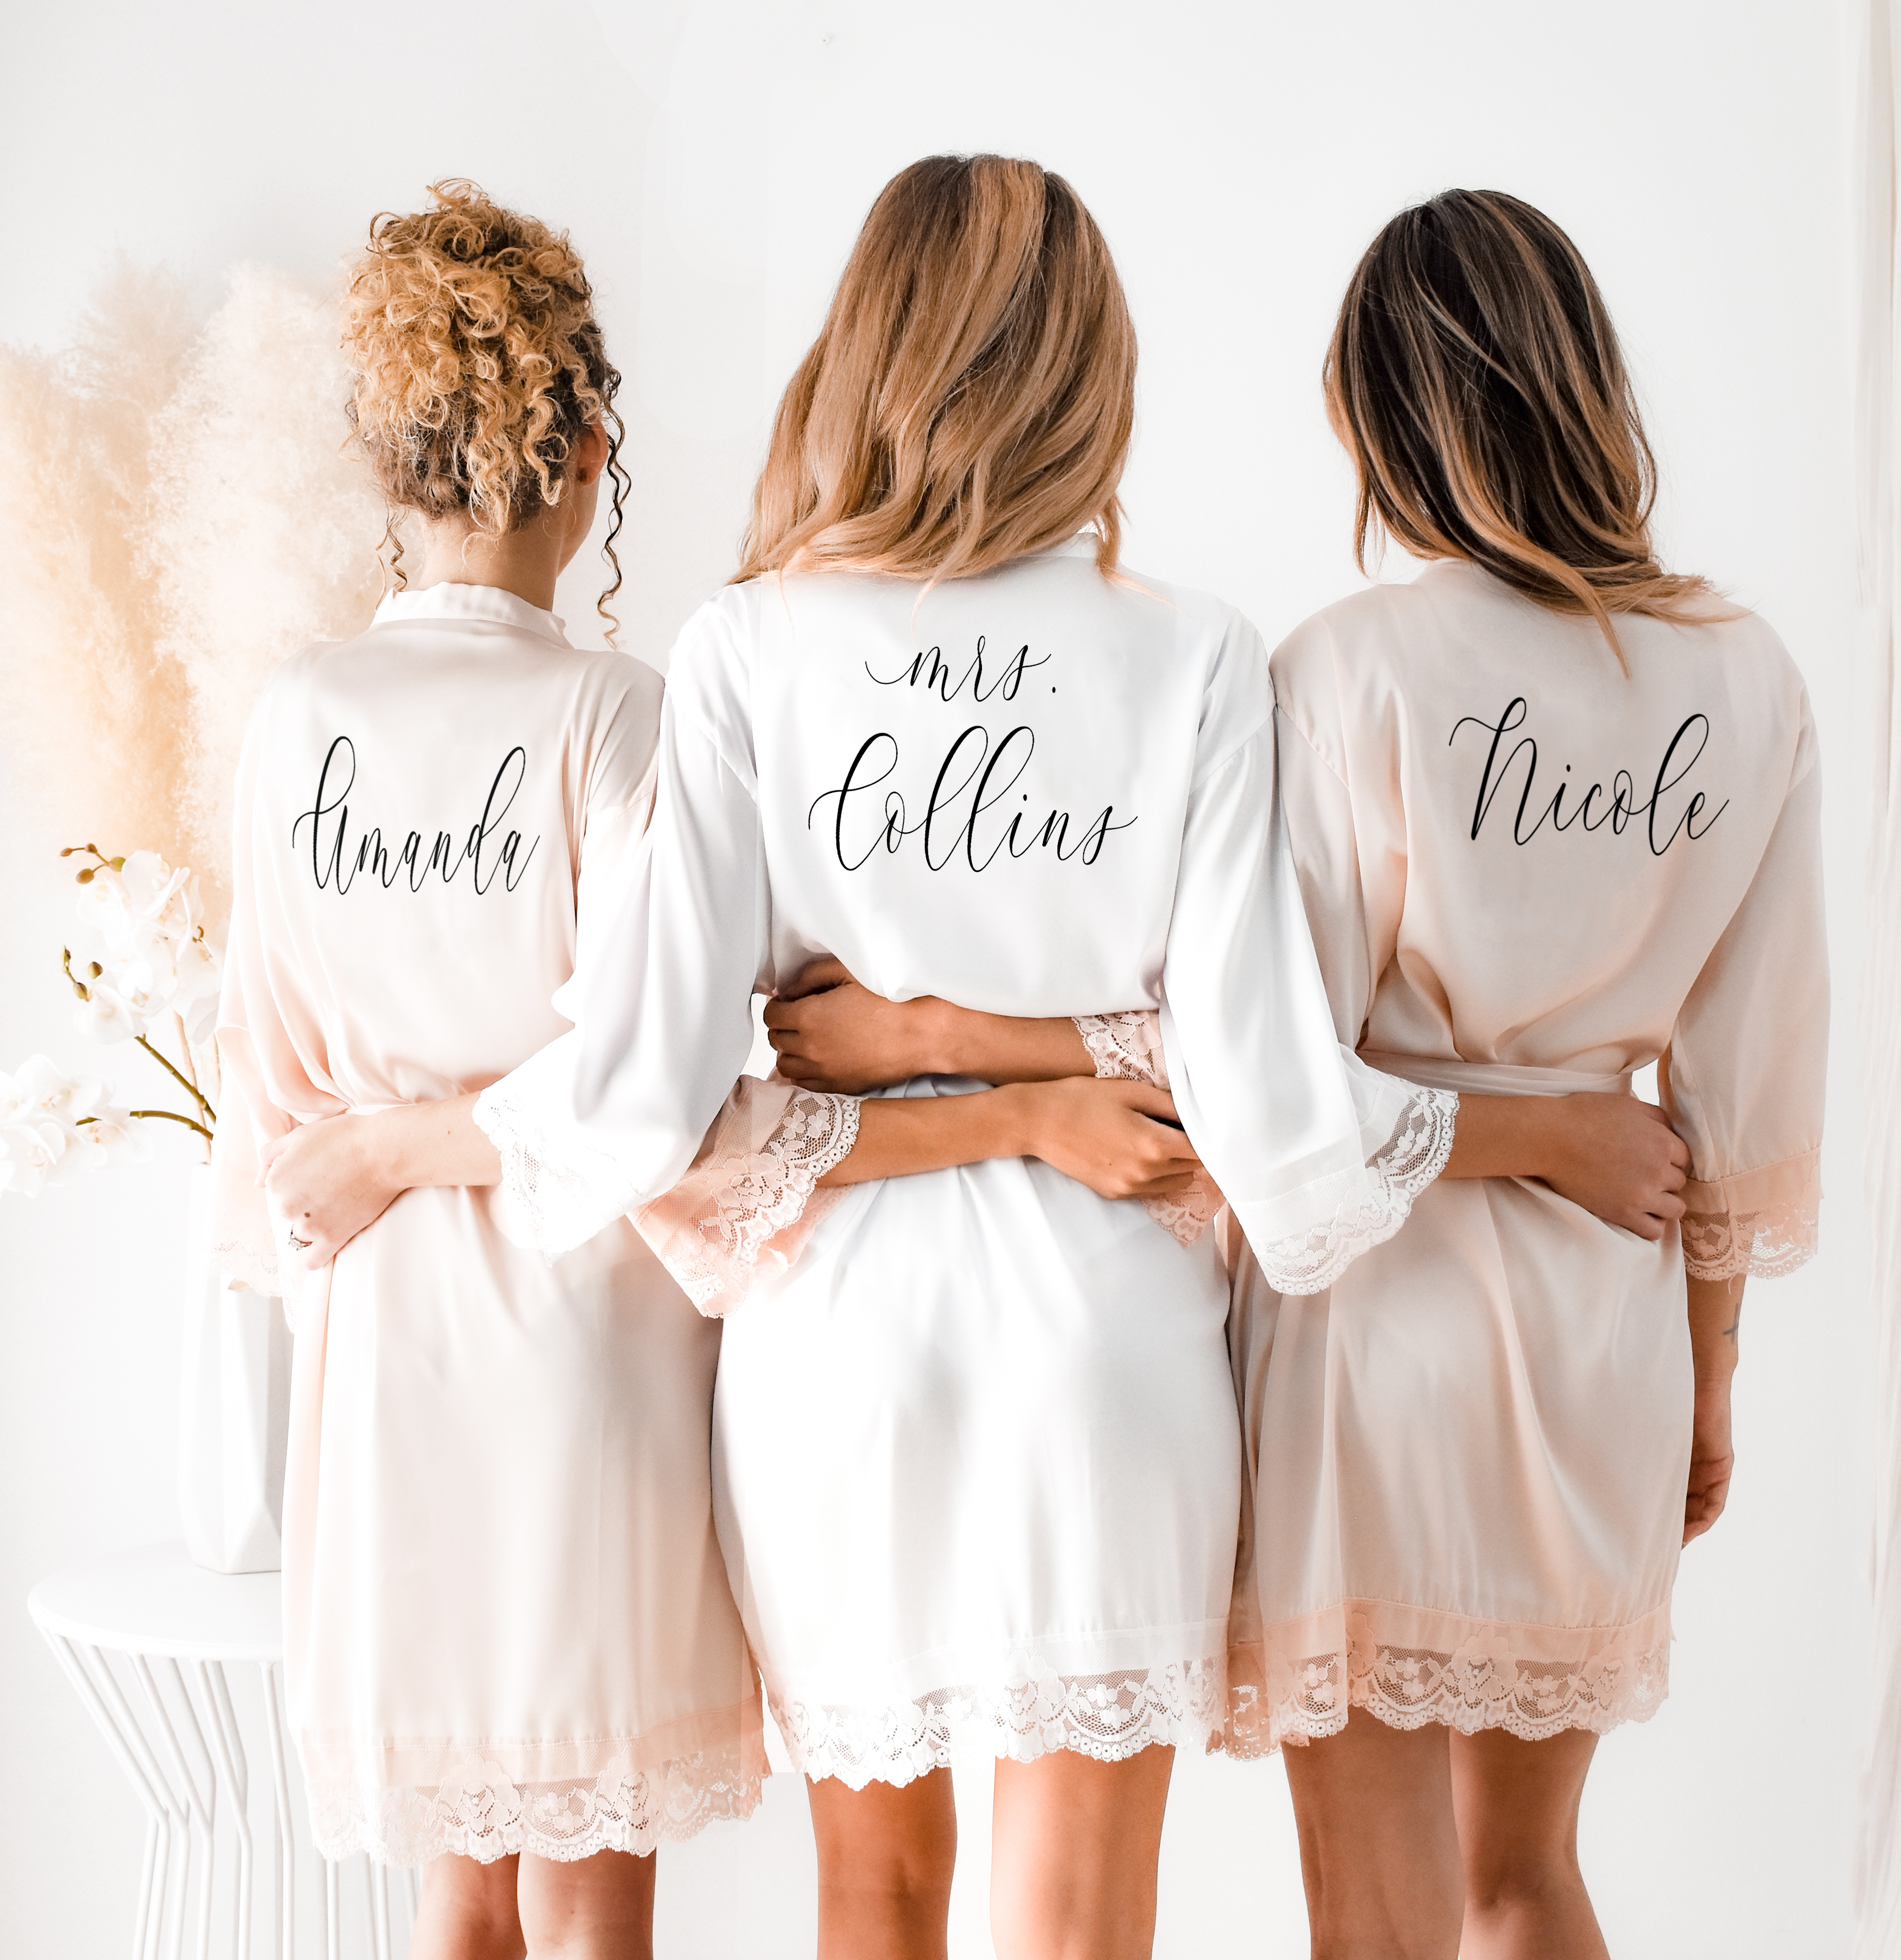 Bride Robe Bride Lace Robes Bridesmaid Robes Lace Wedding Robes Silk Satin Lace Robes Bridal Robe Personalized Robes Embroidered